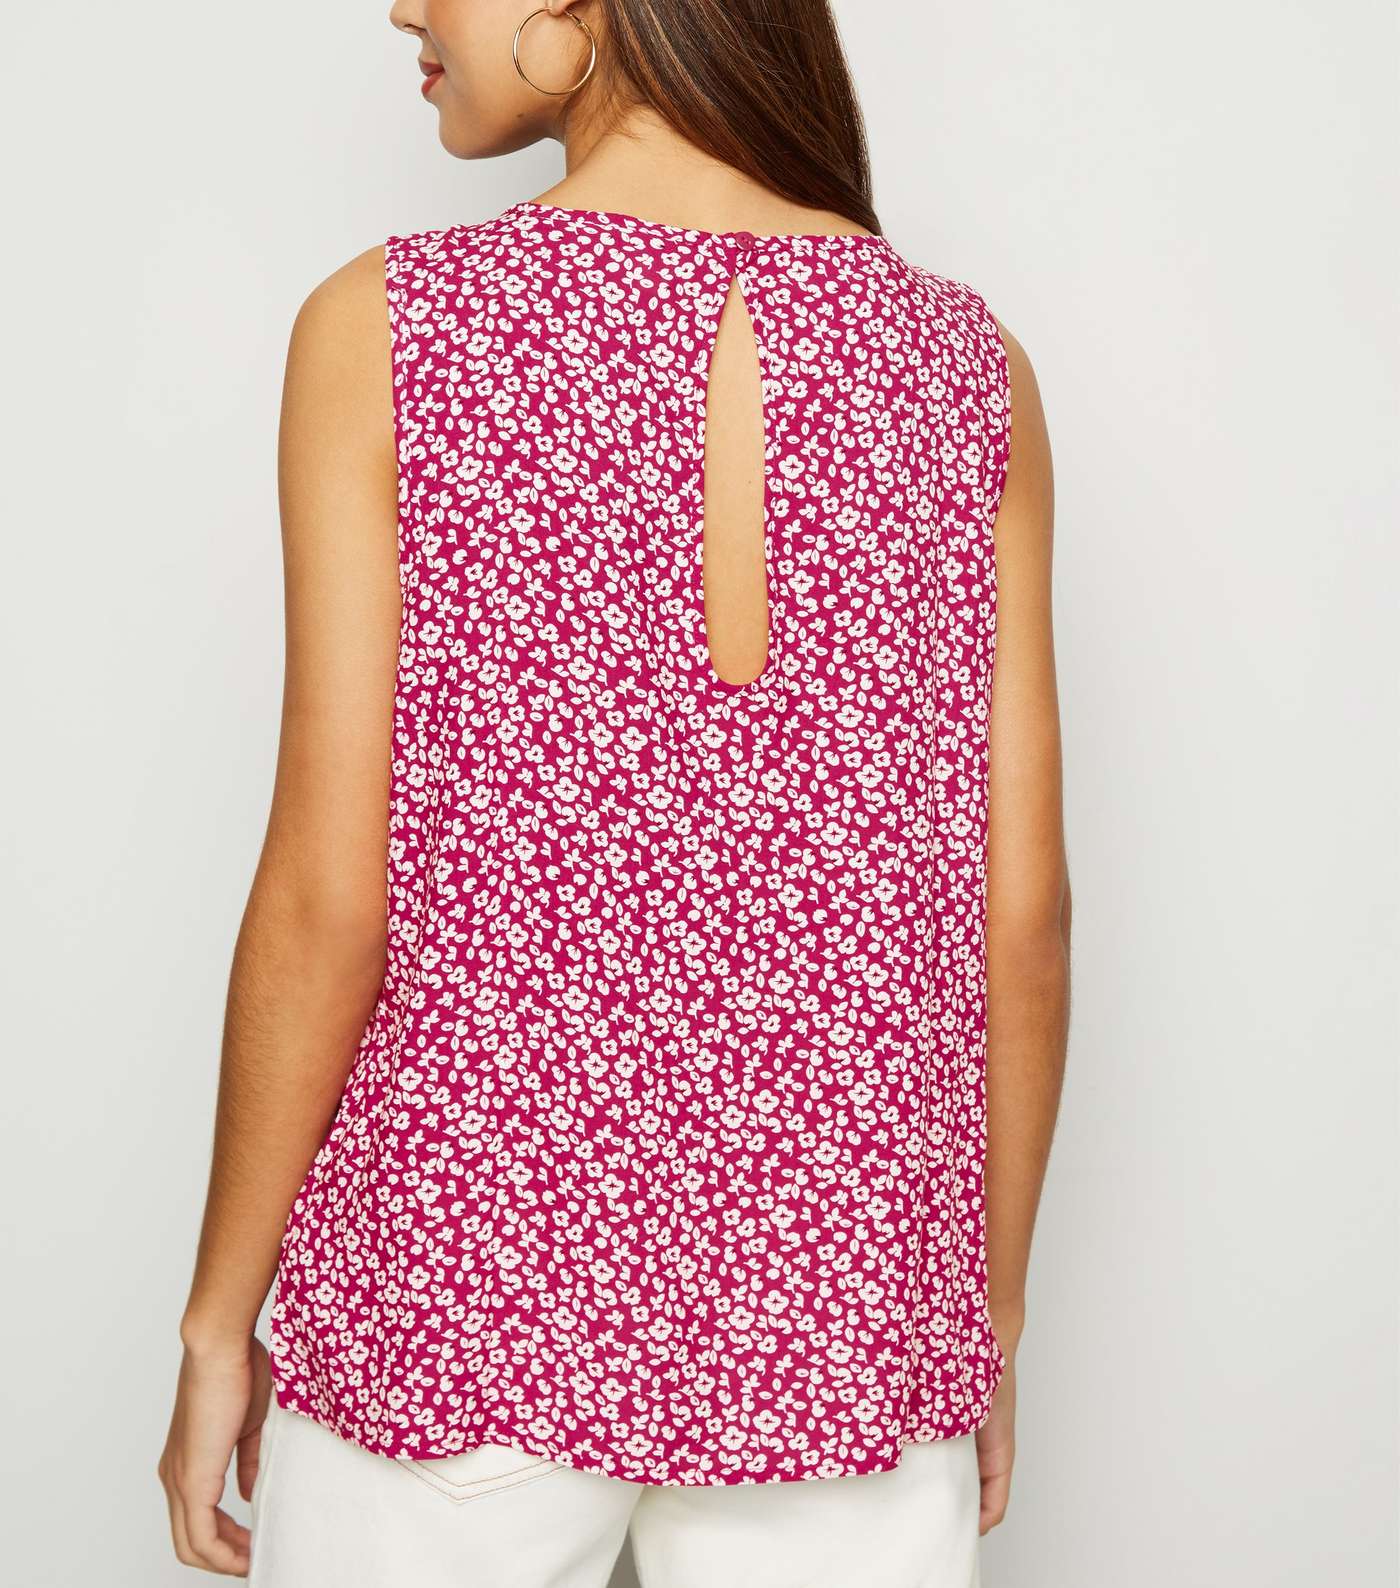 JDY Pink Floral Sleeveless Top Image 3